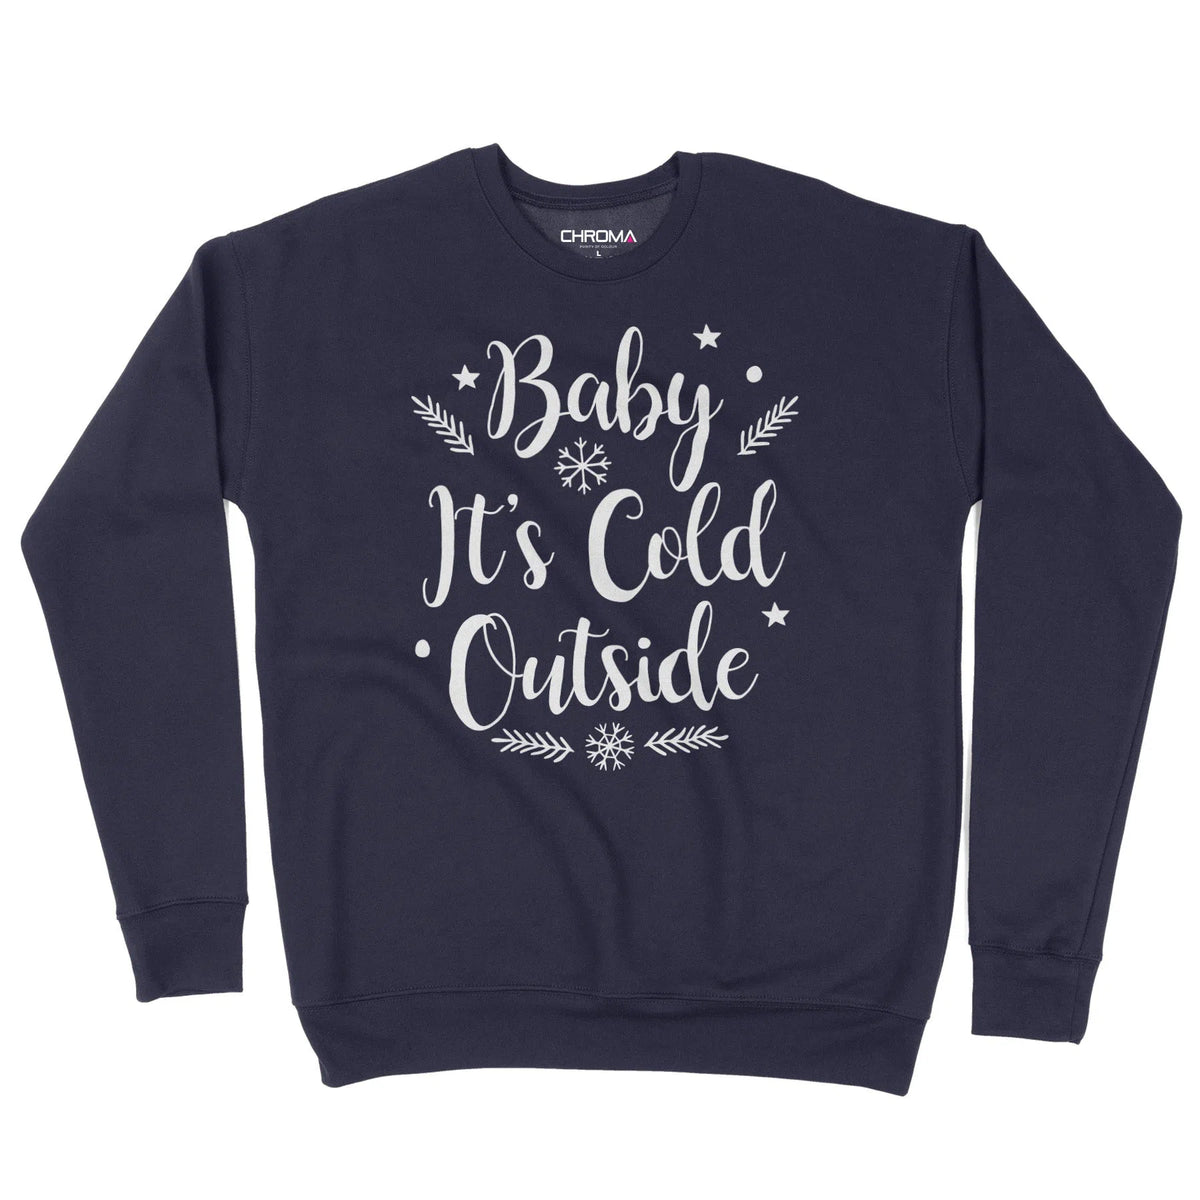 Baby It's Cold Outside | Unisex Christmas Sweater Chroma Clothing